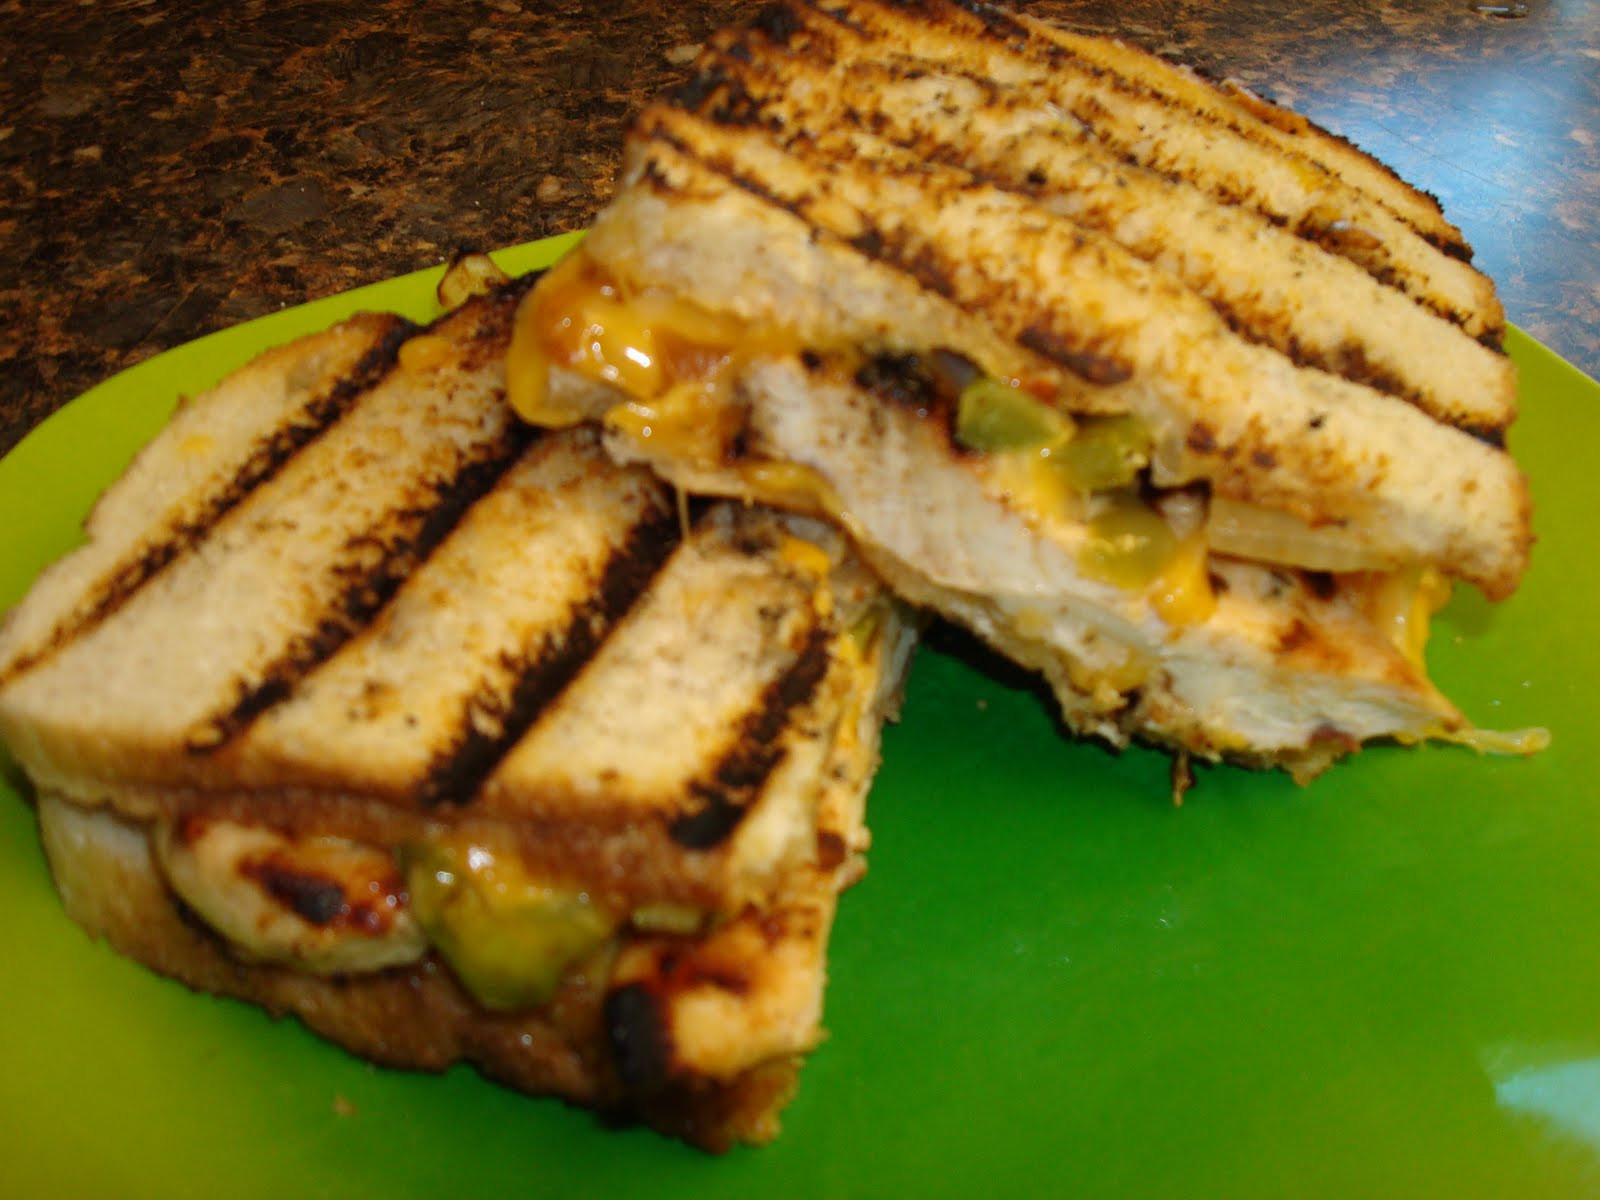 Grilled Panini Sandwich Recipes
 Make lemonade and more Grilled Chicken Panini Sandwiches